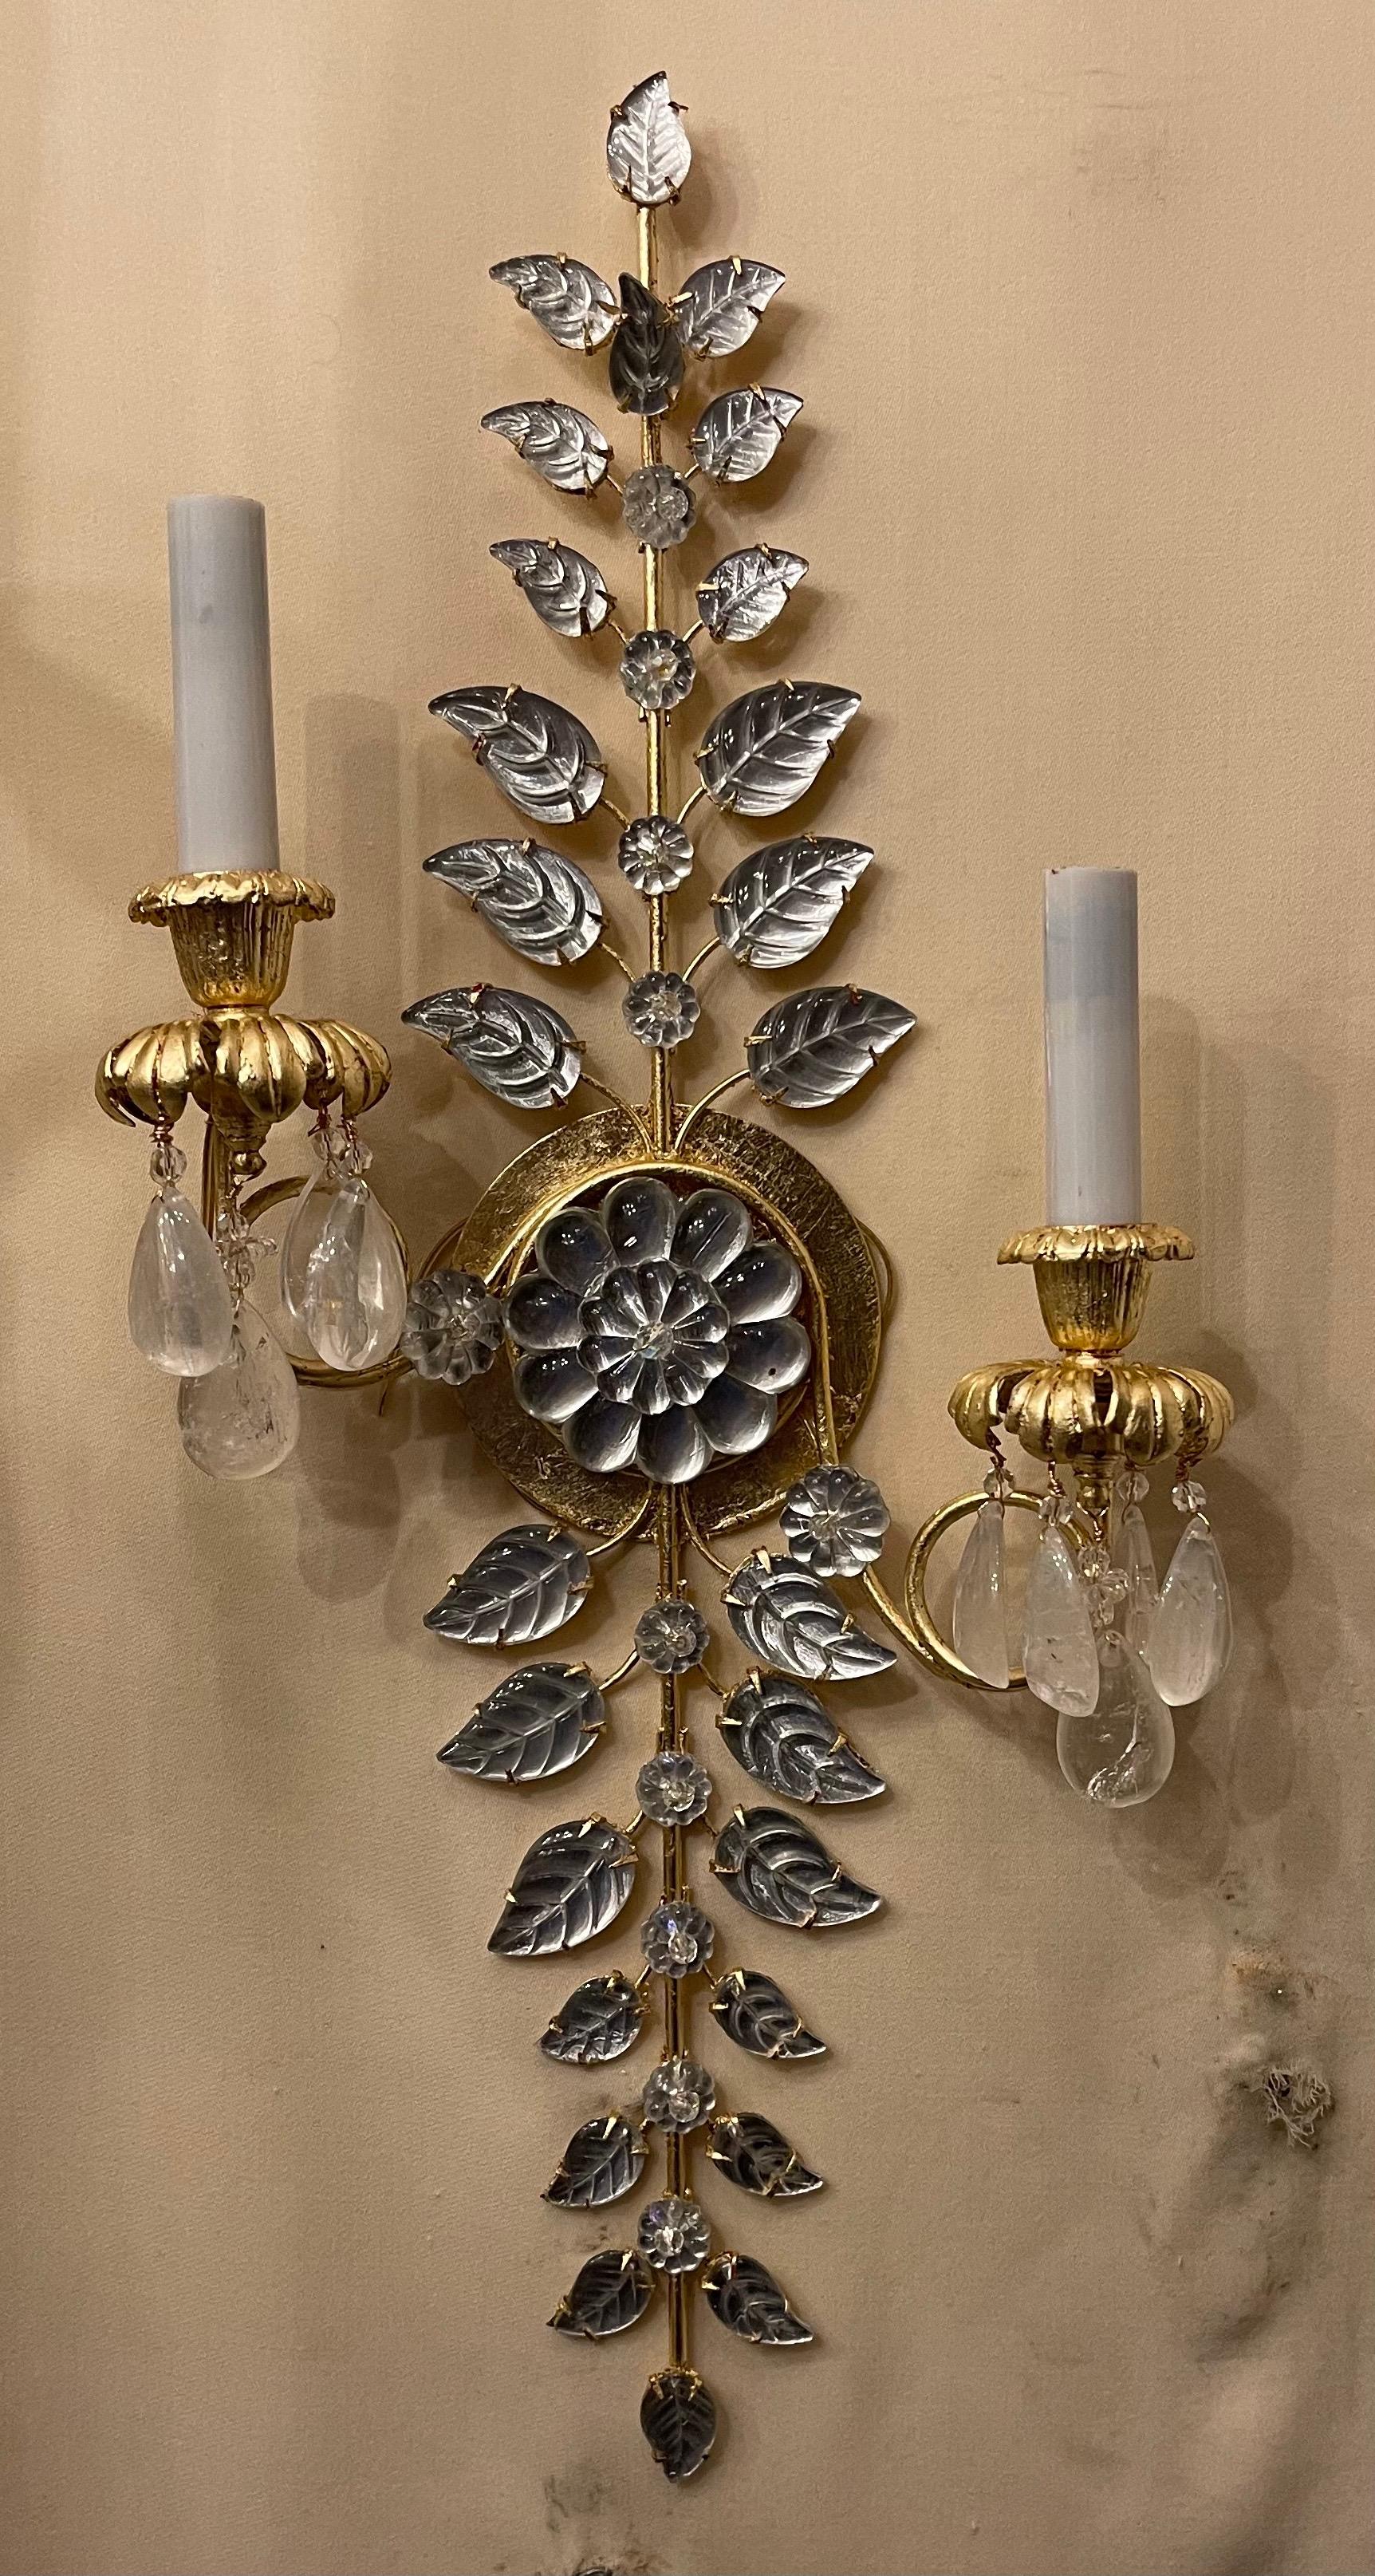 A wonderful pair of Baguès style French gold leaf rock crystal drop flower and leaf 2 candelabra Directional 2-tier light wall sconces, wired and ready to install.

We have the ability of producing these 
Fabulous sconces with a 6-8 week lead